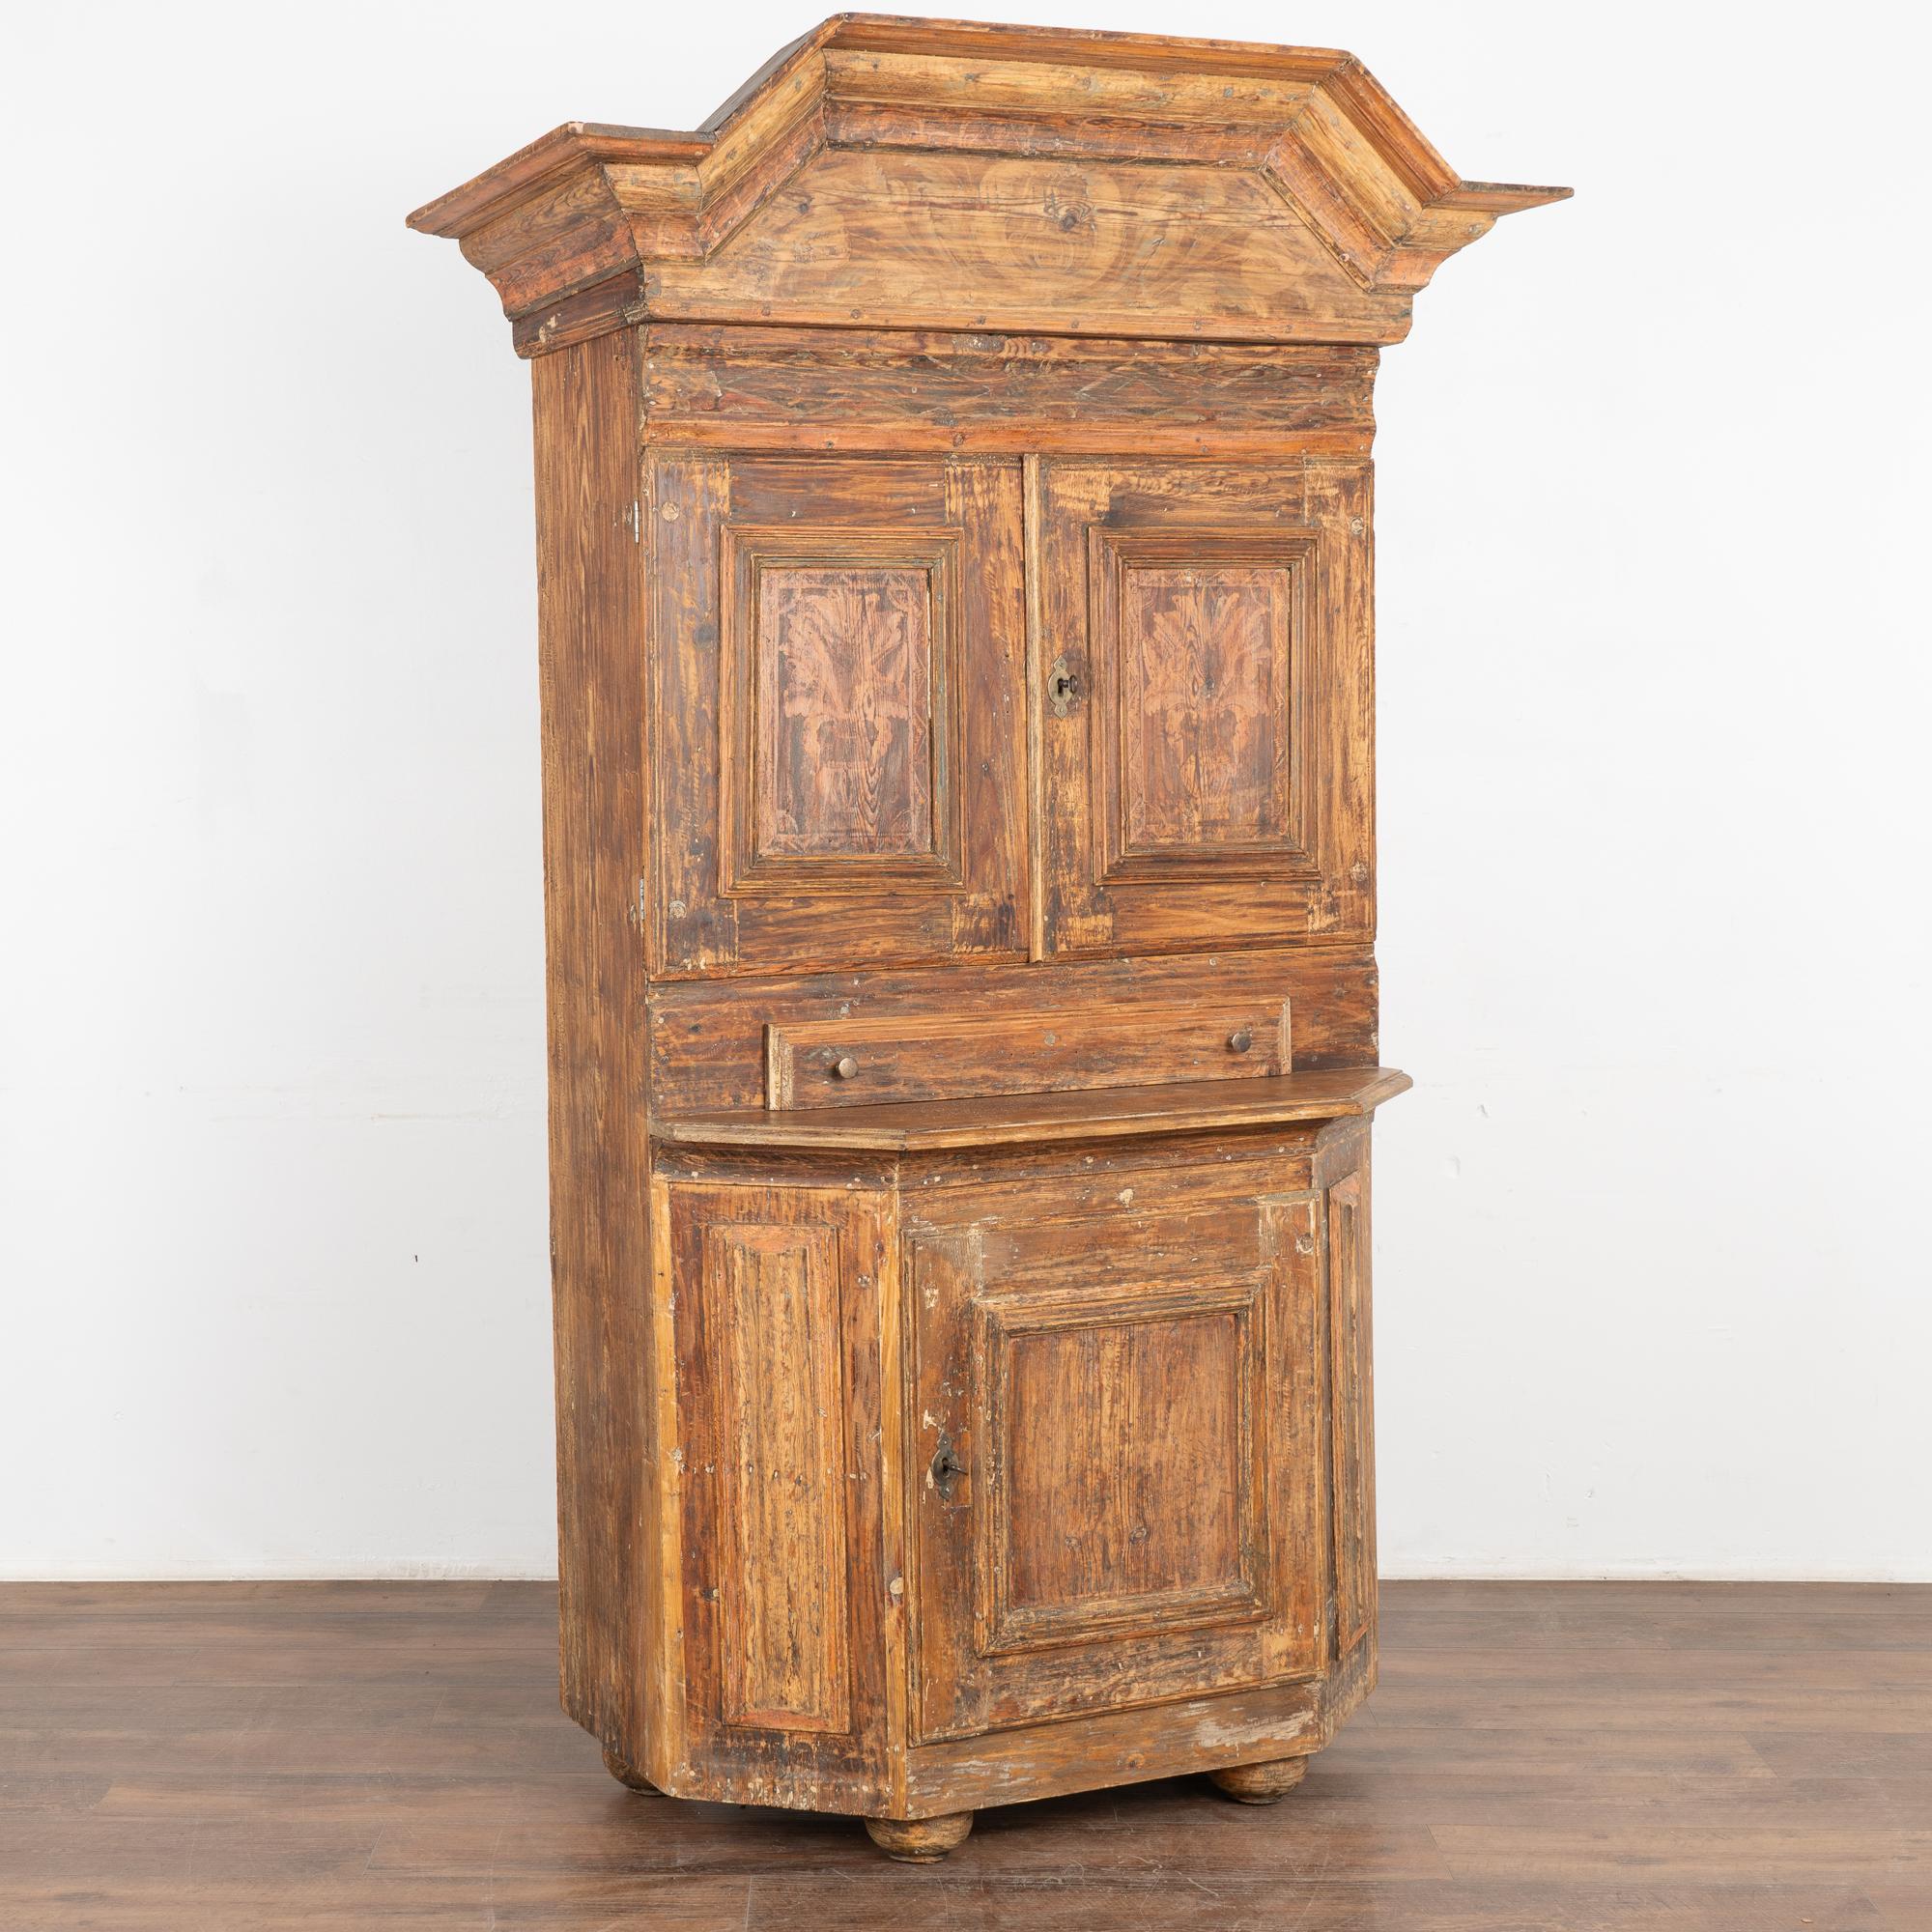 A wonderful example of Swedish country craftsmanship from the Dalarna region.
This cupboard has a soft, warm aged patina due to the original painted being rubbed/scraped down to the natural pine below. Look closely and you will see the faint remains